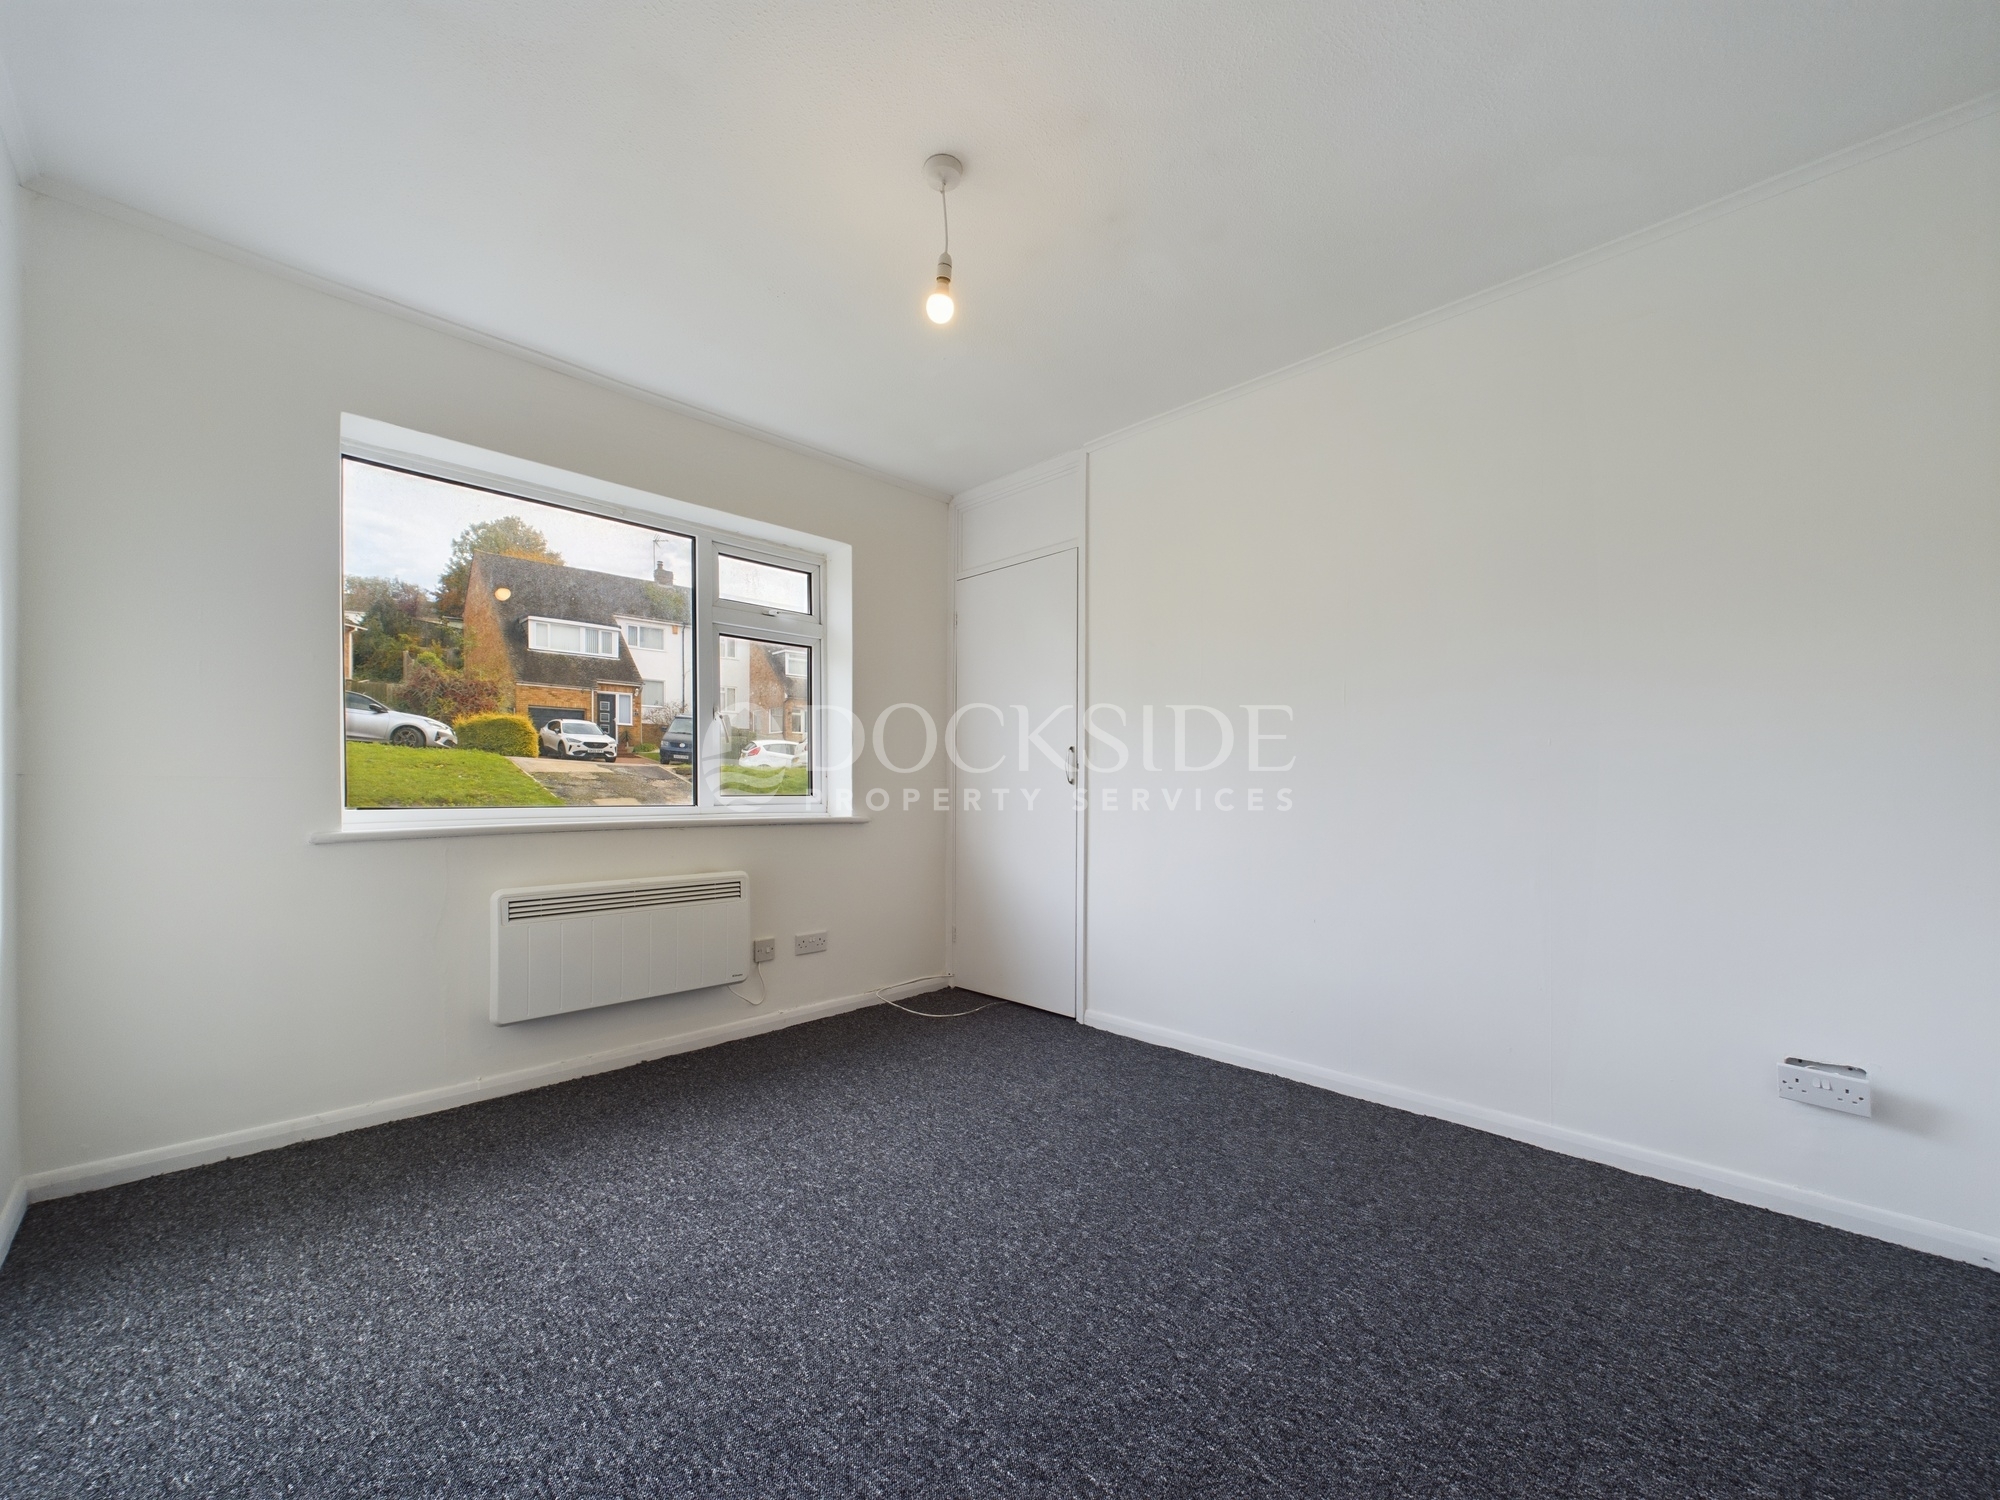 2 bed flat to rent in Wetheral Drive, Chatham  - Property Image 4